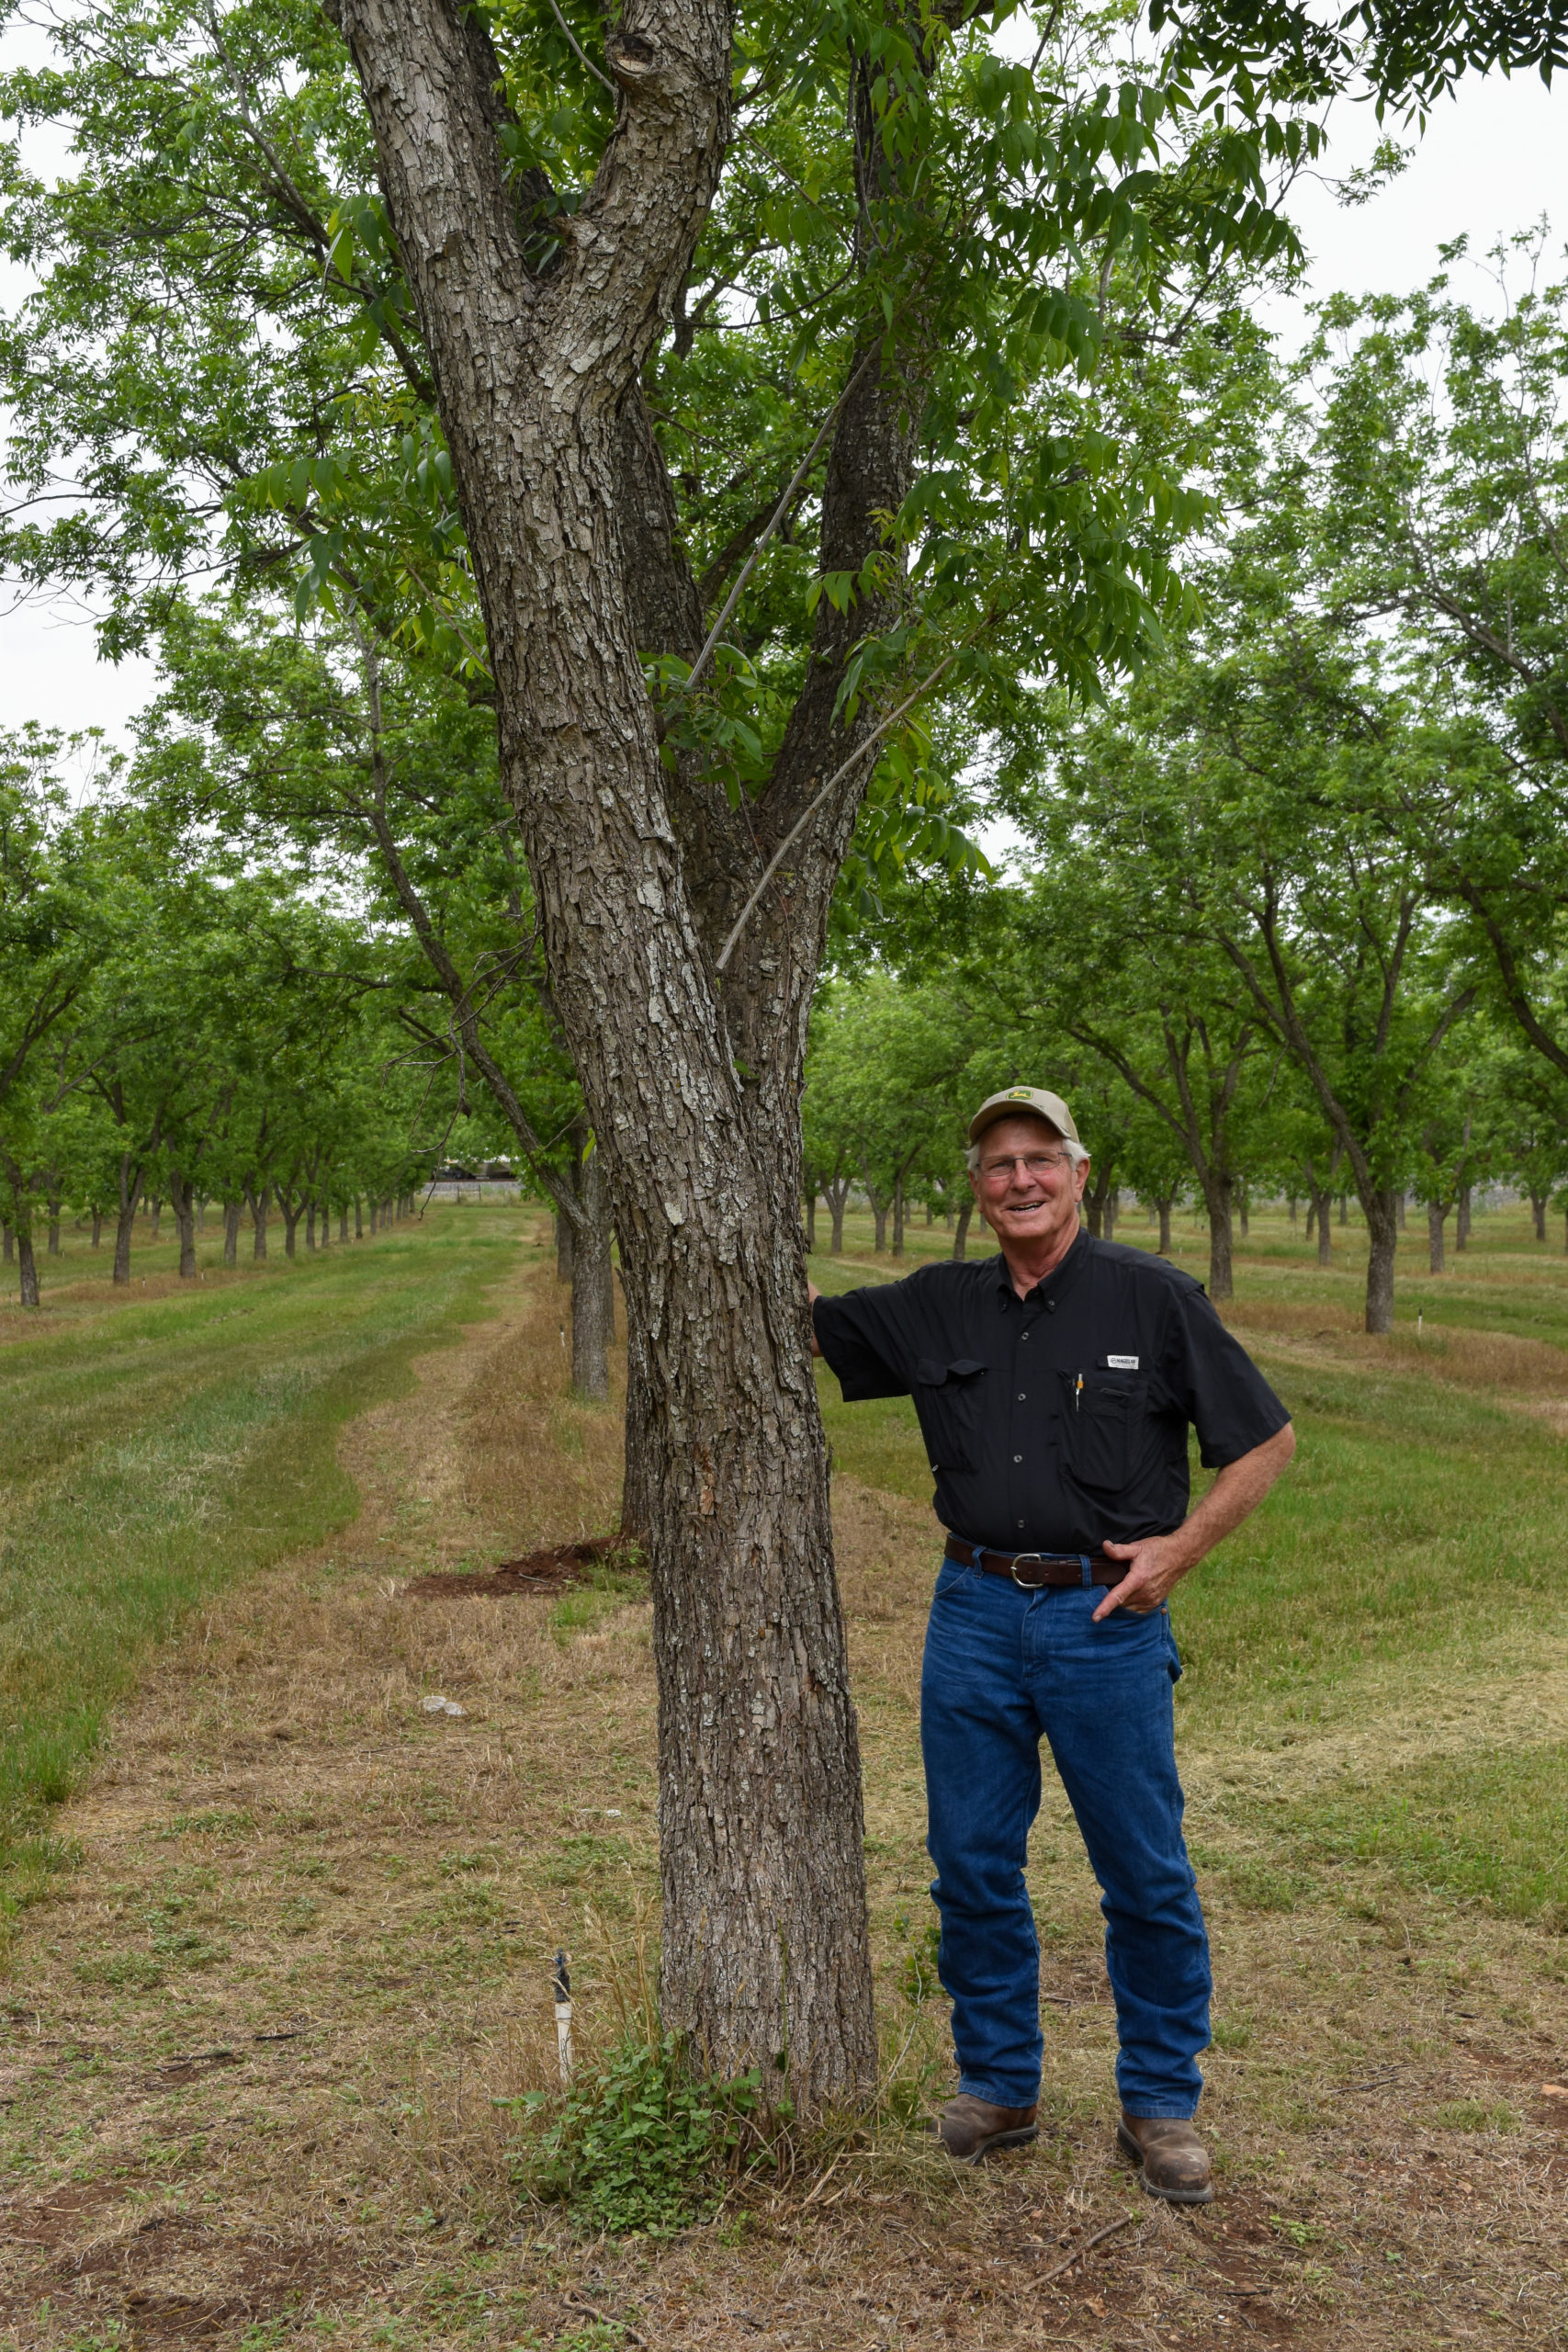 Mark Friesenhahn poses with a mature pecan tree in his family orchard.